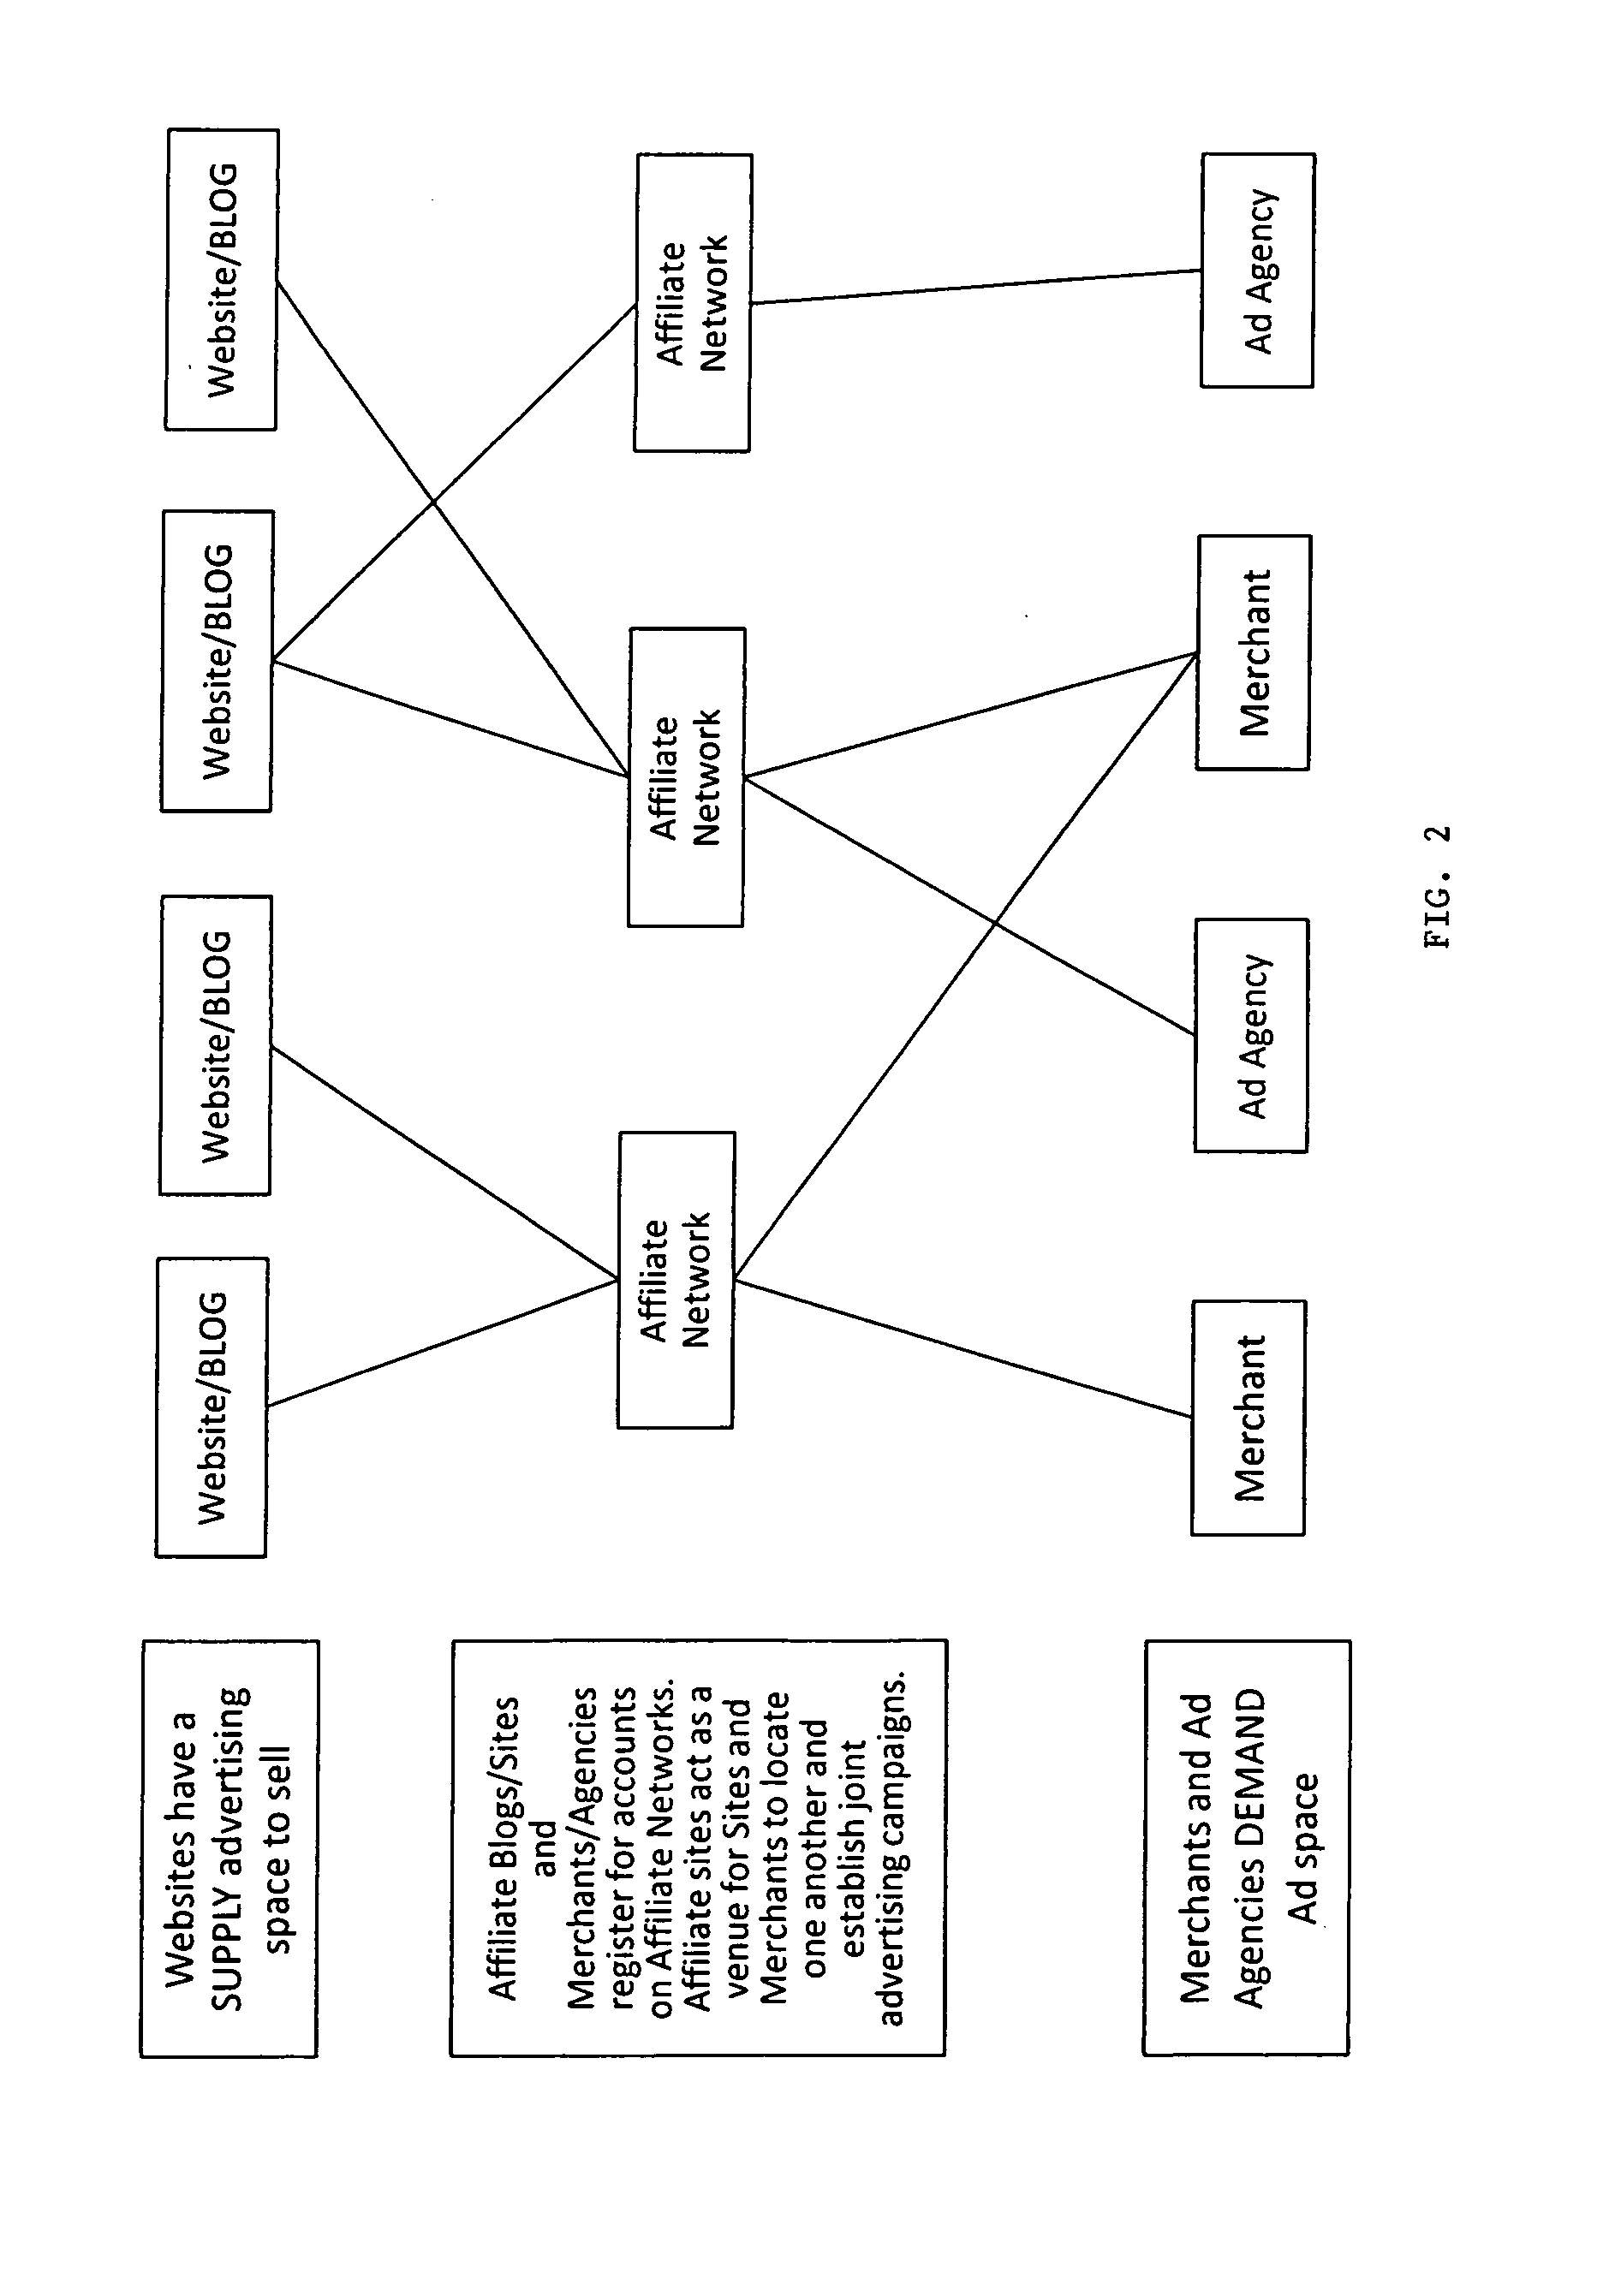 Internet affiliate network marketing system and method with associated computer program